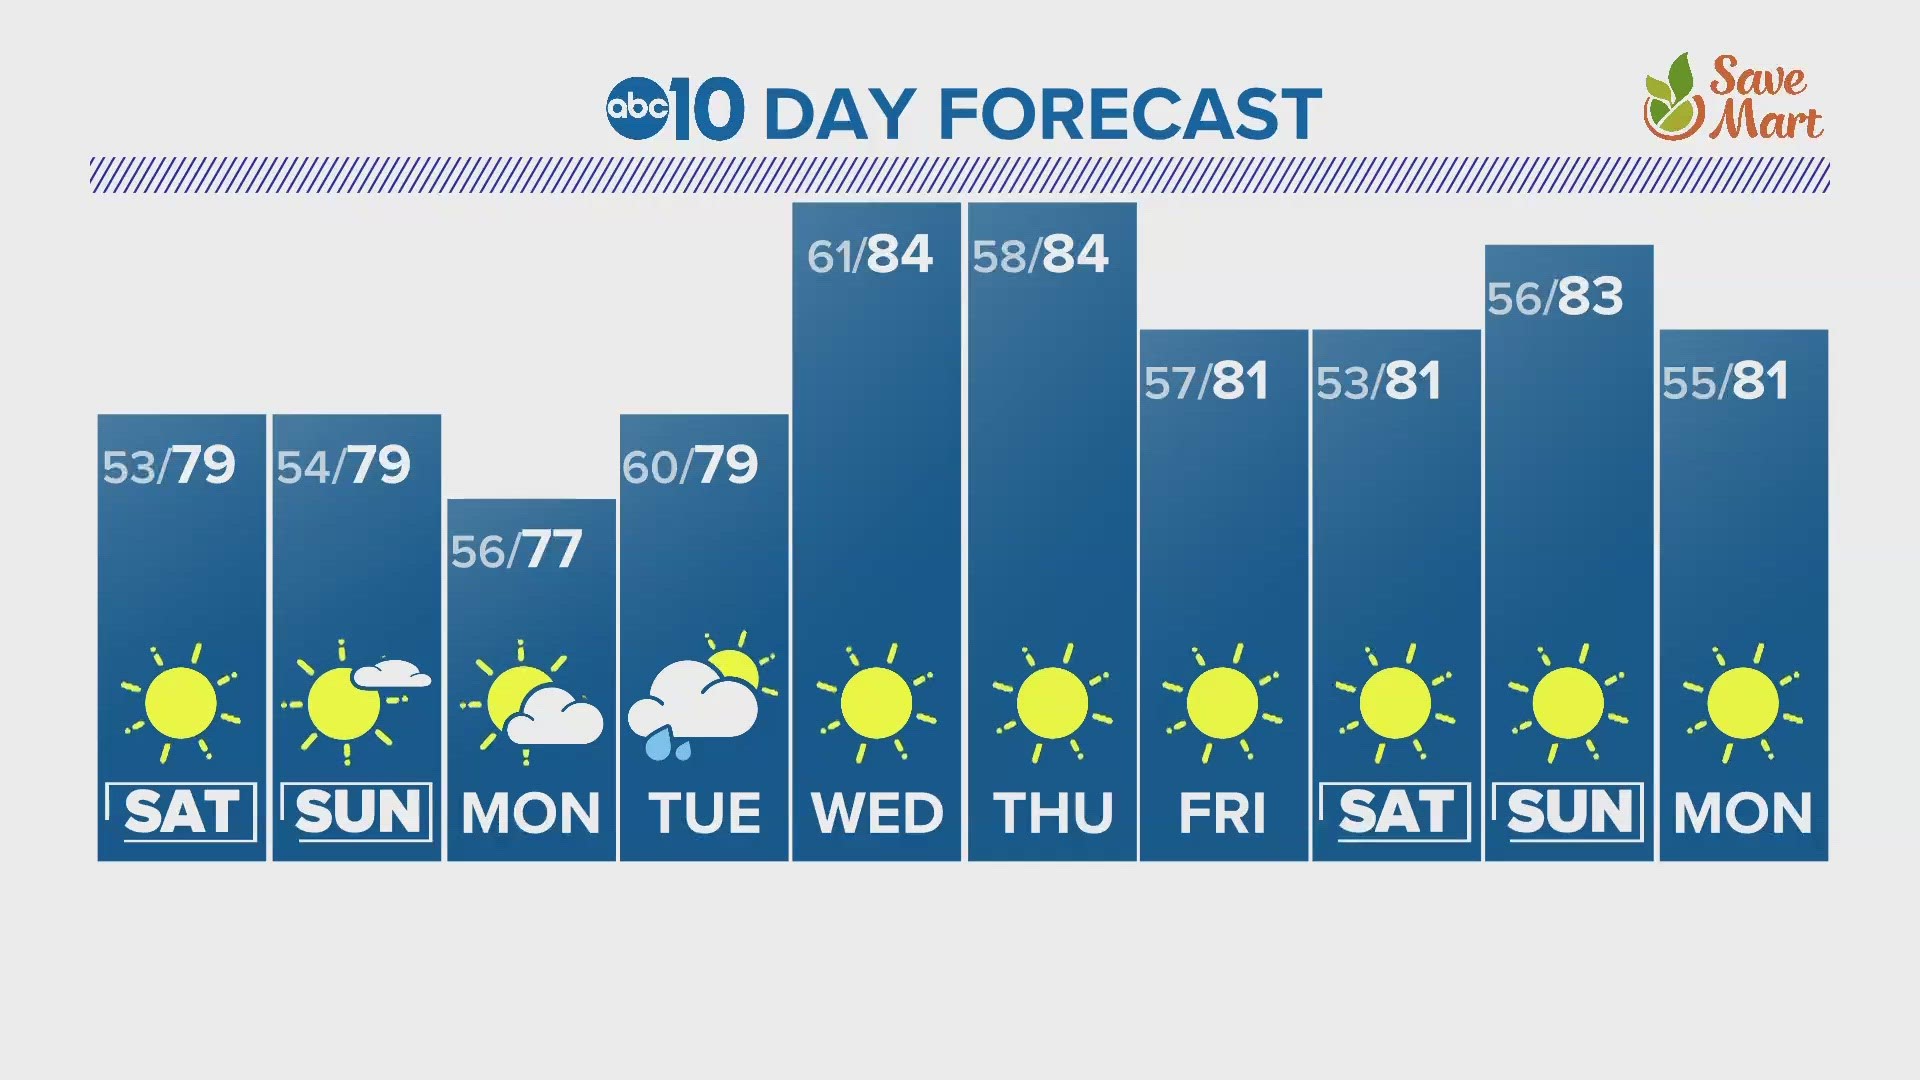 ABC10's Carly Gomez gives us a look at our 10-day forecast.